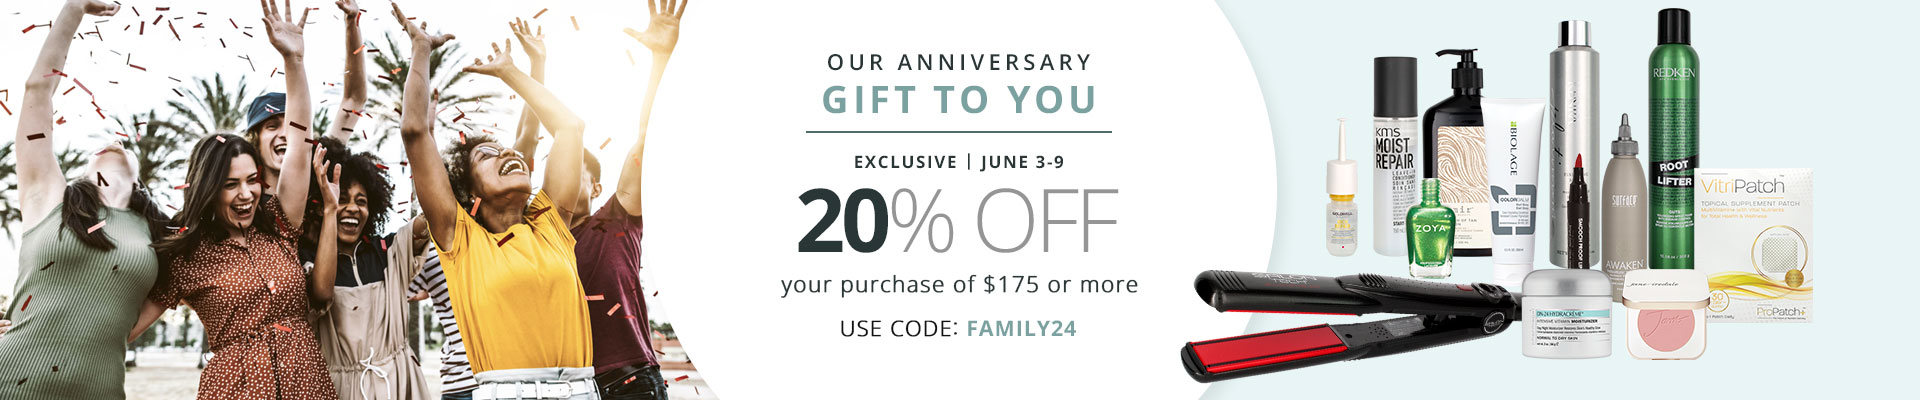 Our Anniversary Gift to You! 20% off your purchase of $175 or more - Use Code: FAMILY24 | Ends 6/9